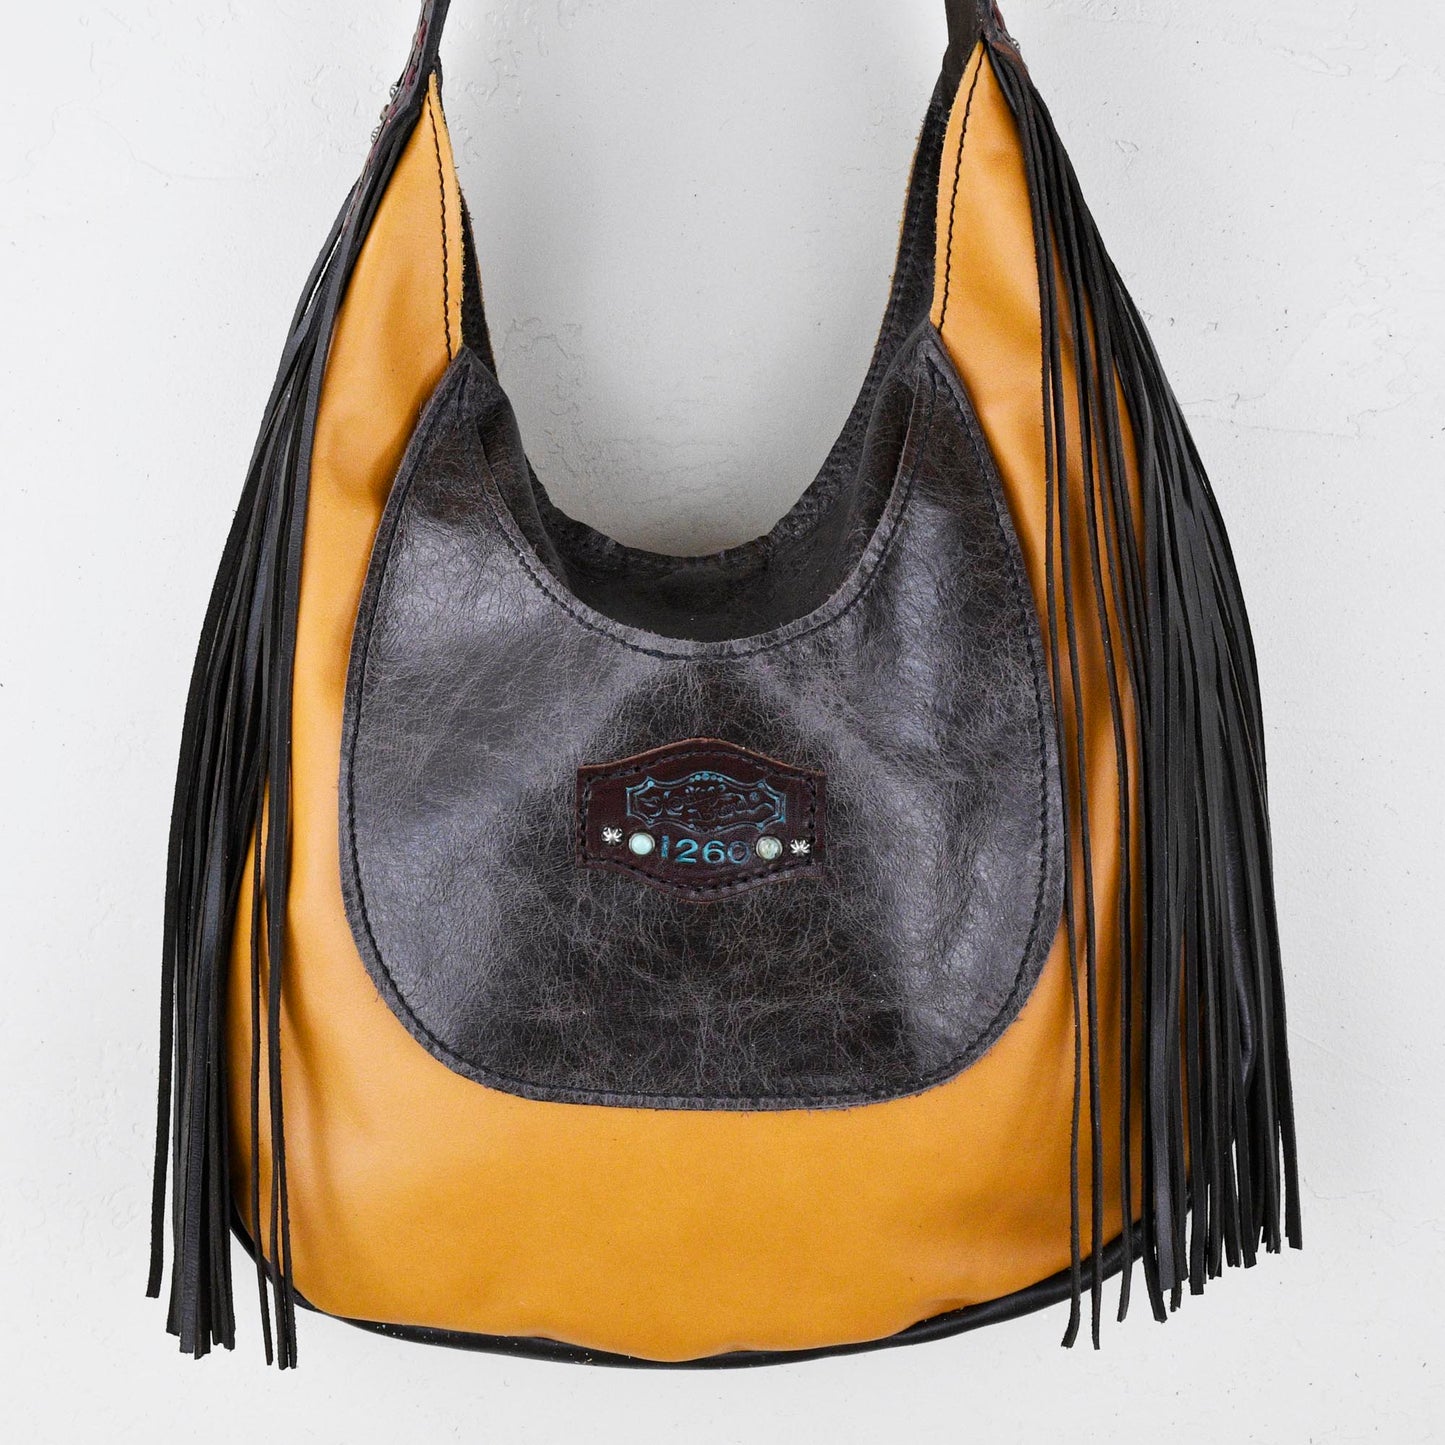 
                  
                    Two-tone leather Marilyn bag #1260 with fringe detail displayed on a white background by Heritage Brand.
                  
                